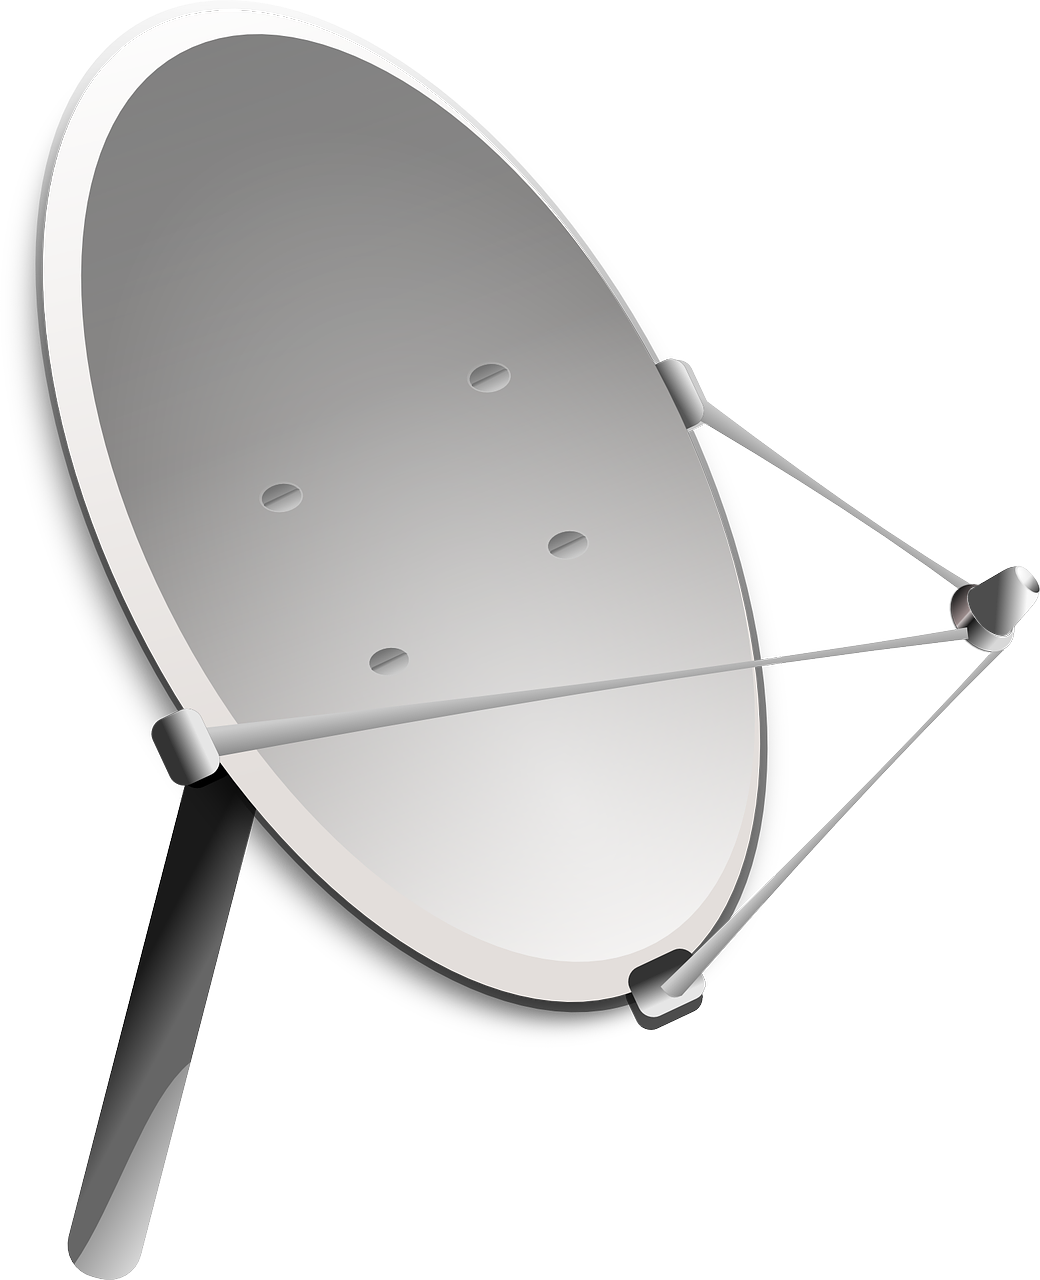  How To Get Free Antenna From Dish 